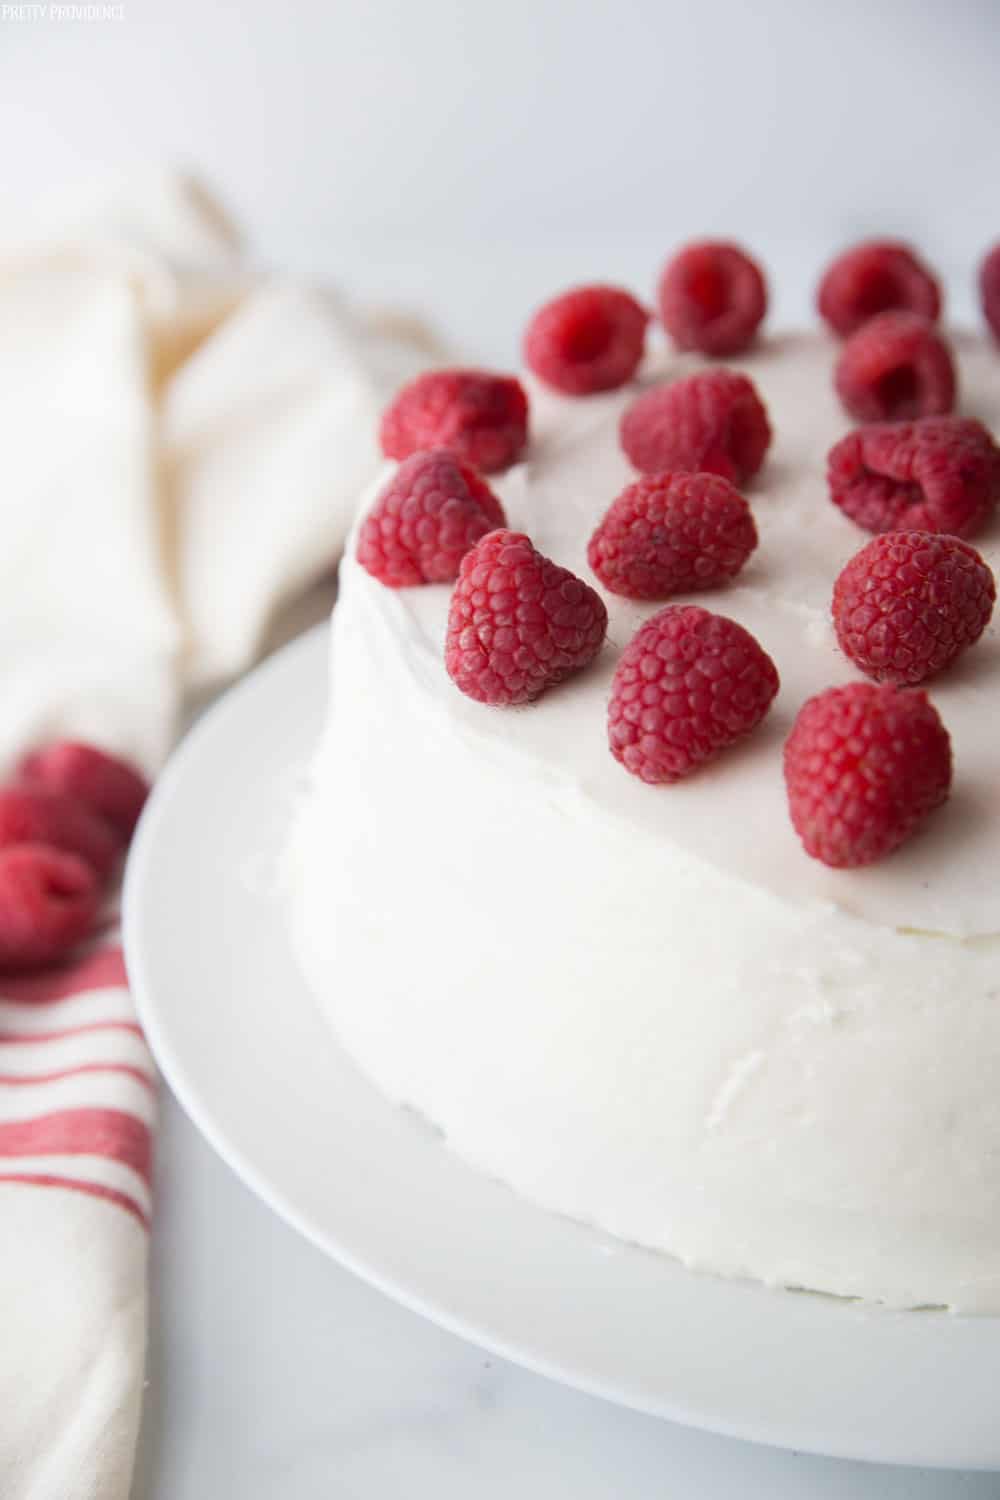 Chocolate Raspberry Cake covered in cream cheese frosting garnished with fresh raspberries on the top.